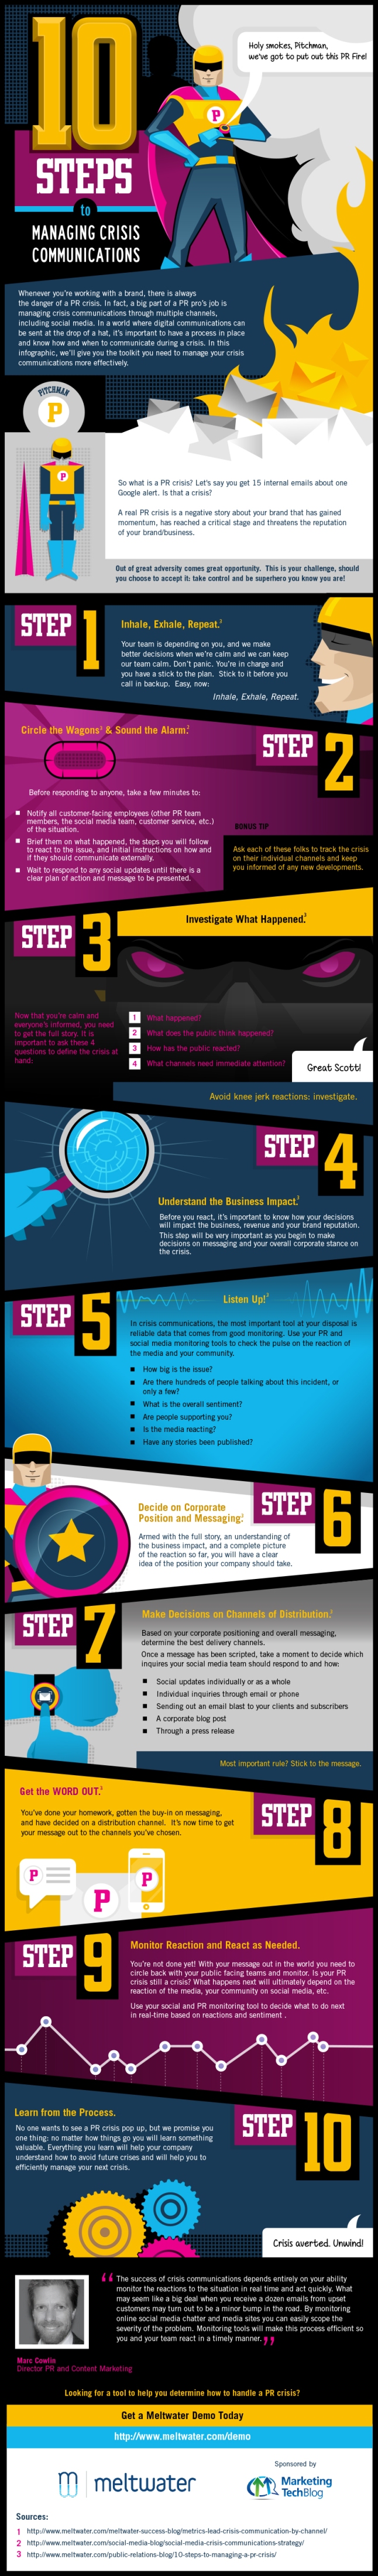 Meltwater-Infographic-mod3